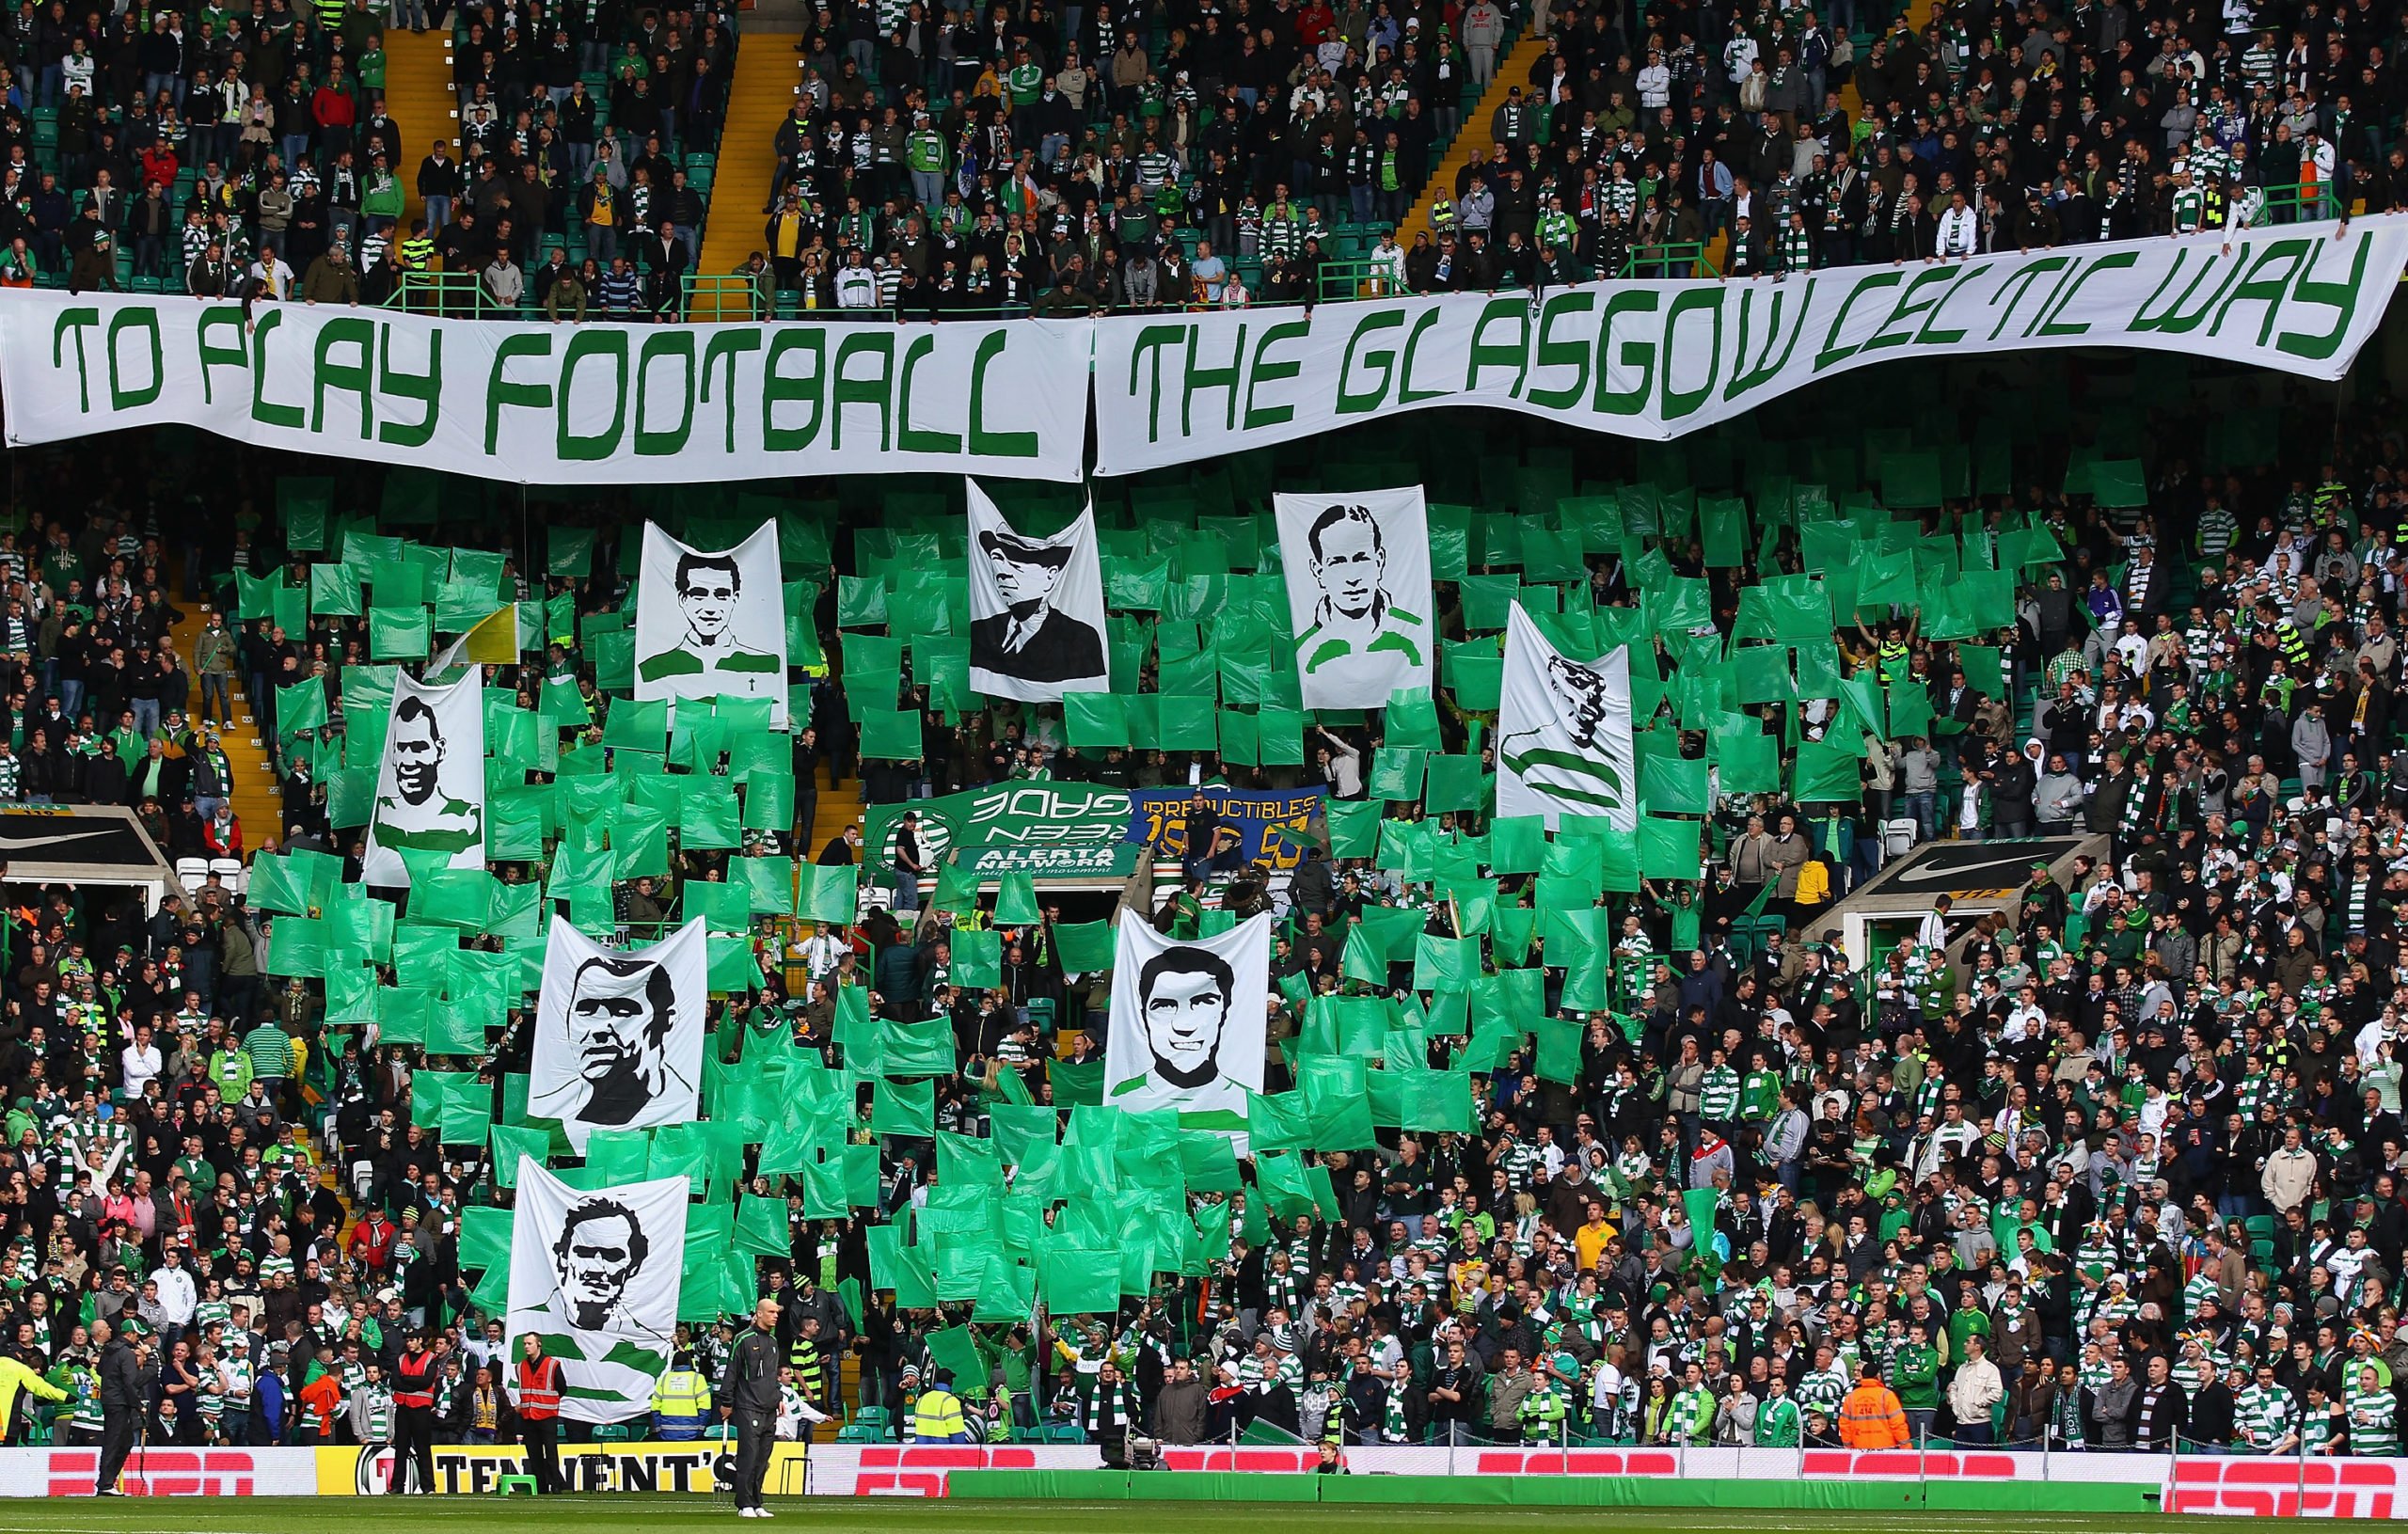 Celtic supporters absurdly accused of bullying on same day as launching charity appeal